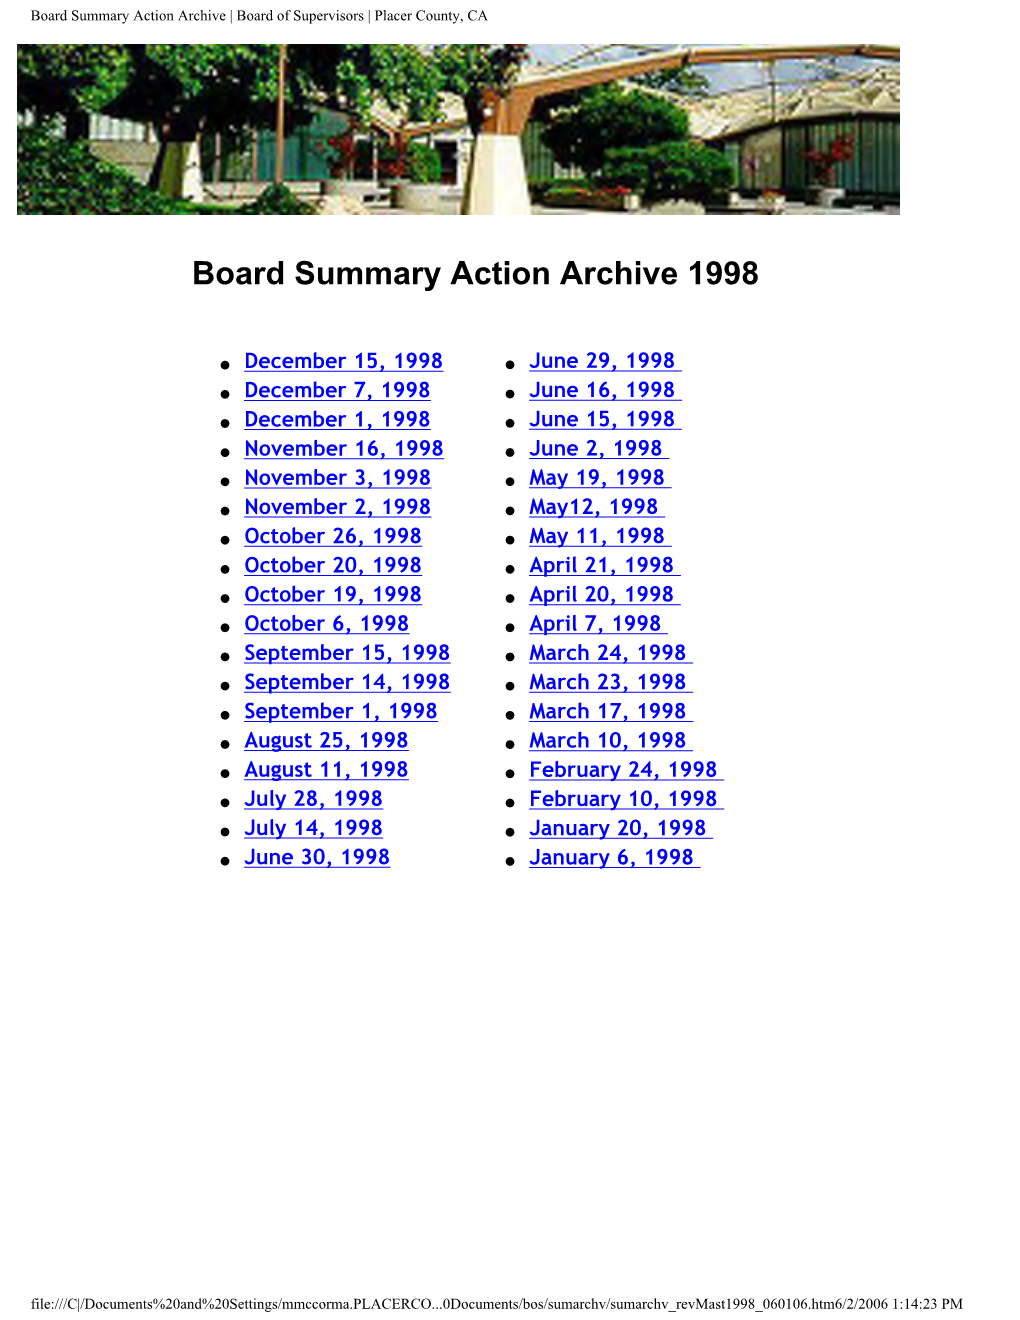 1998 Board Summary Action Archive